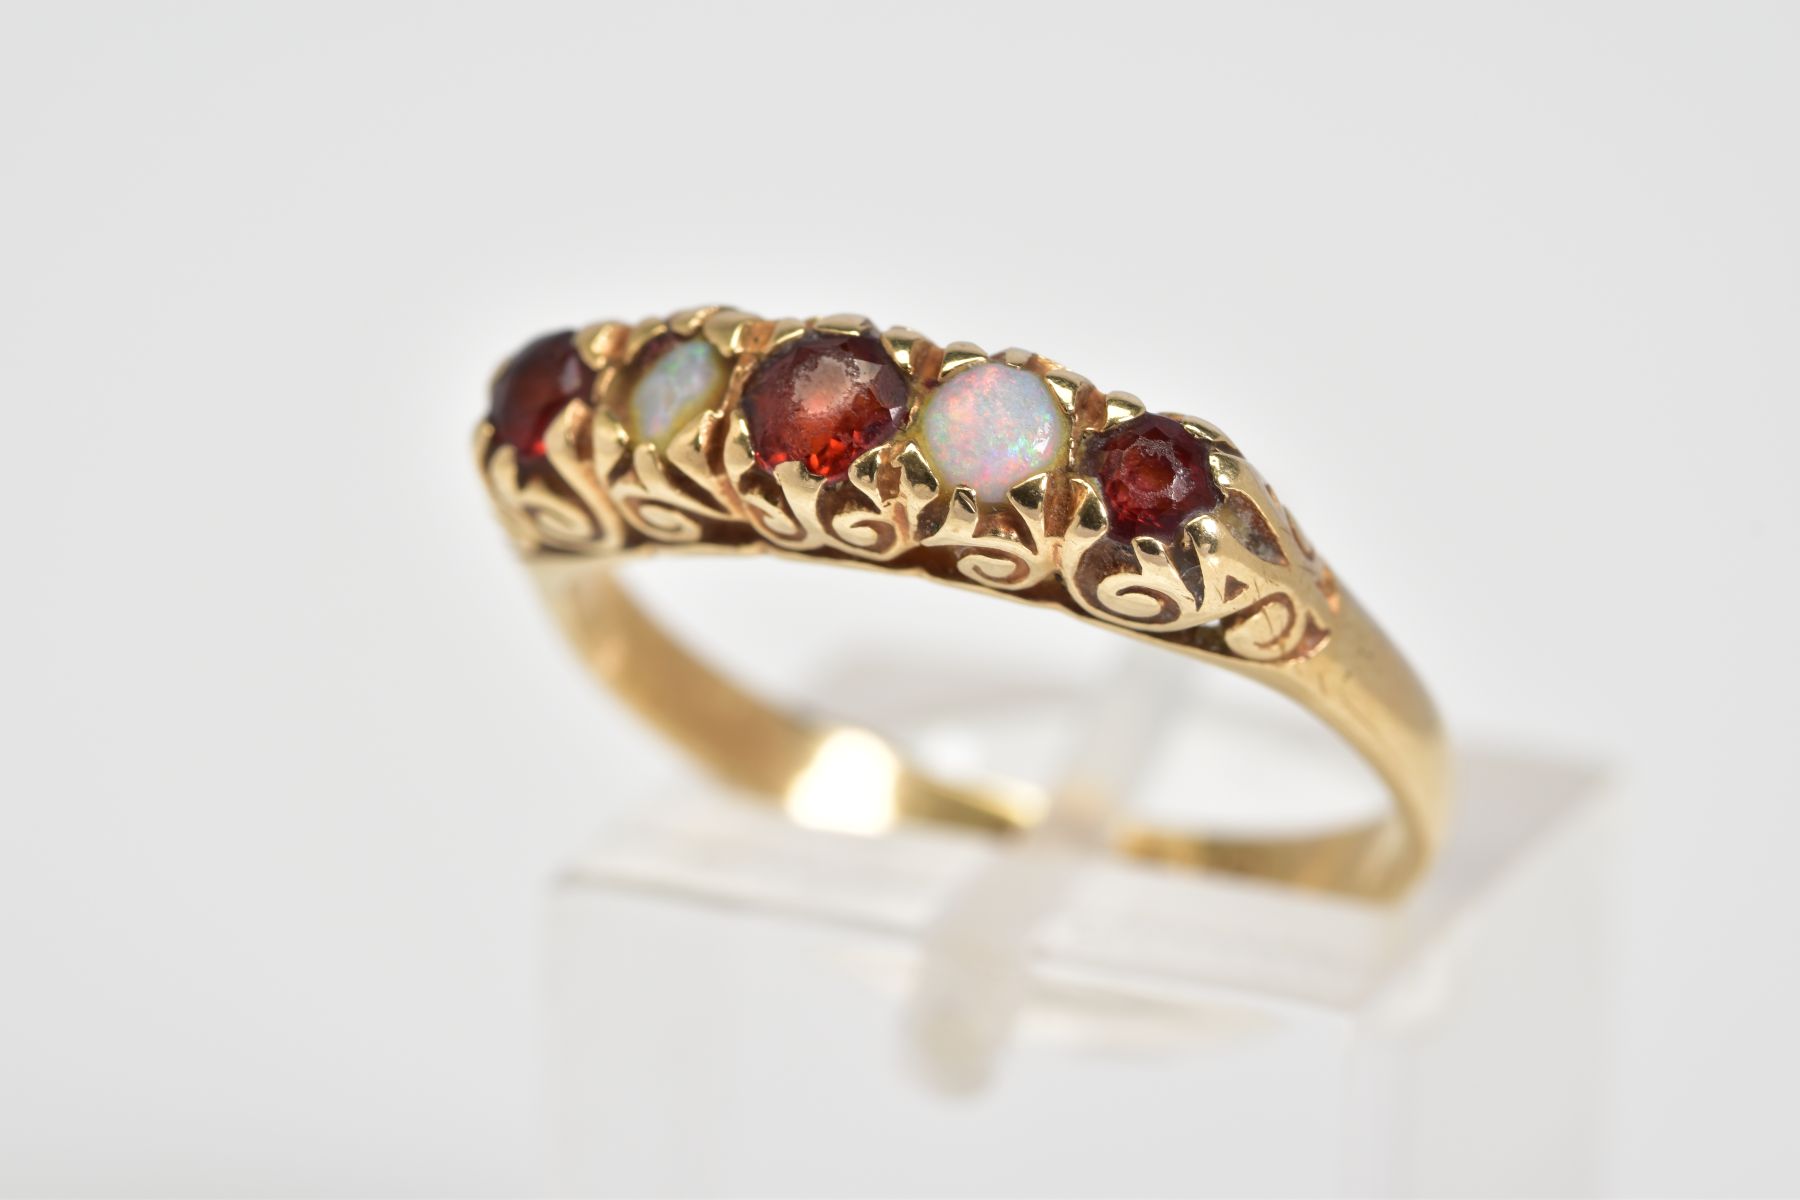 A 9CT GOLD RING, designed as a row of three circular cut garnets interspaced by two circular opals